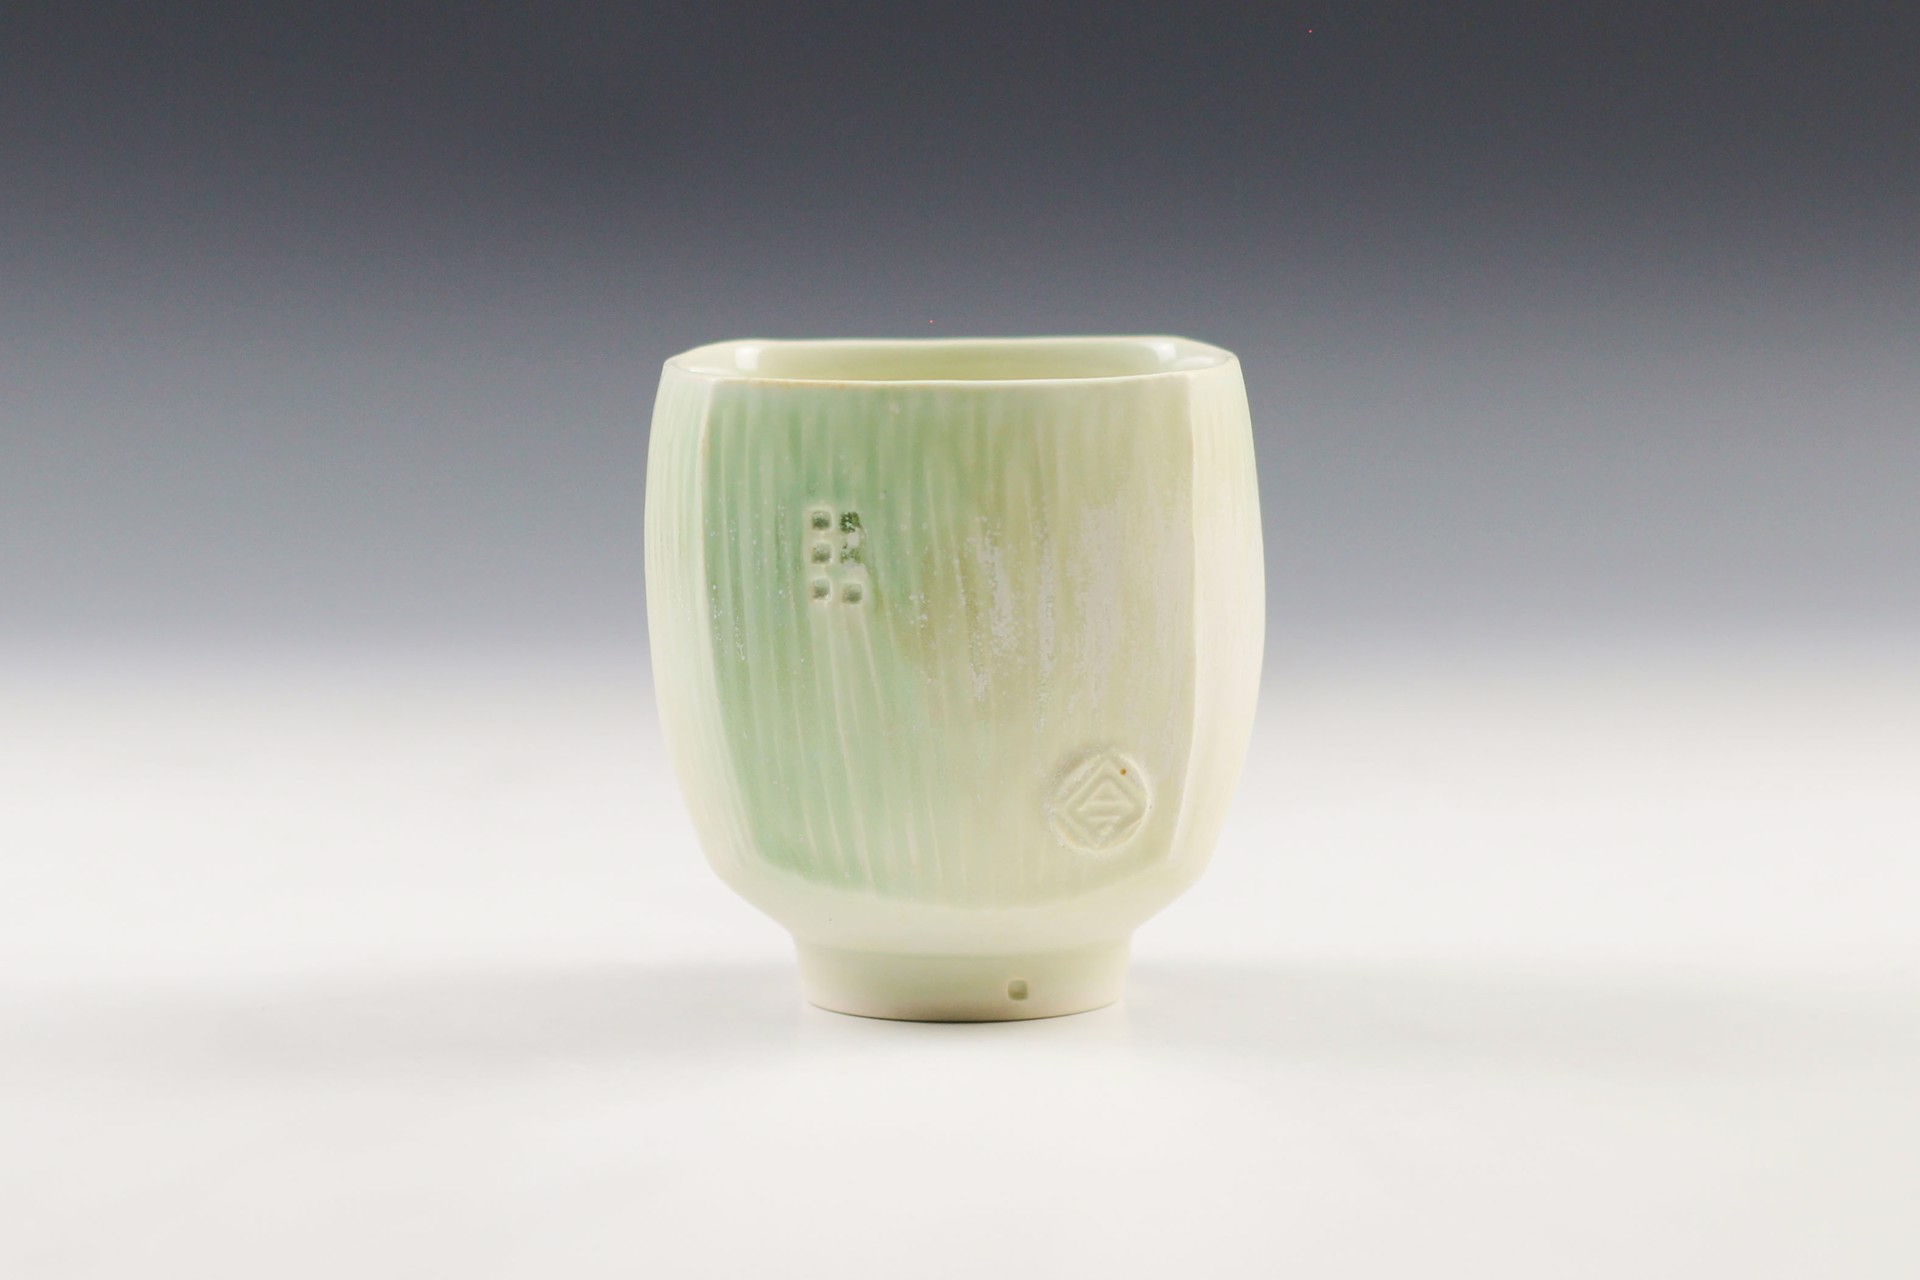 Square White and Green Cup by Nick DeVries